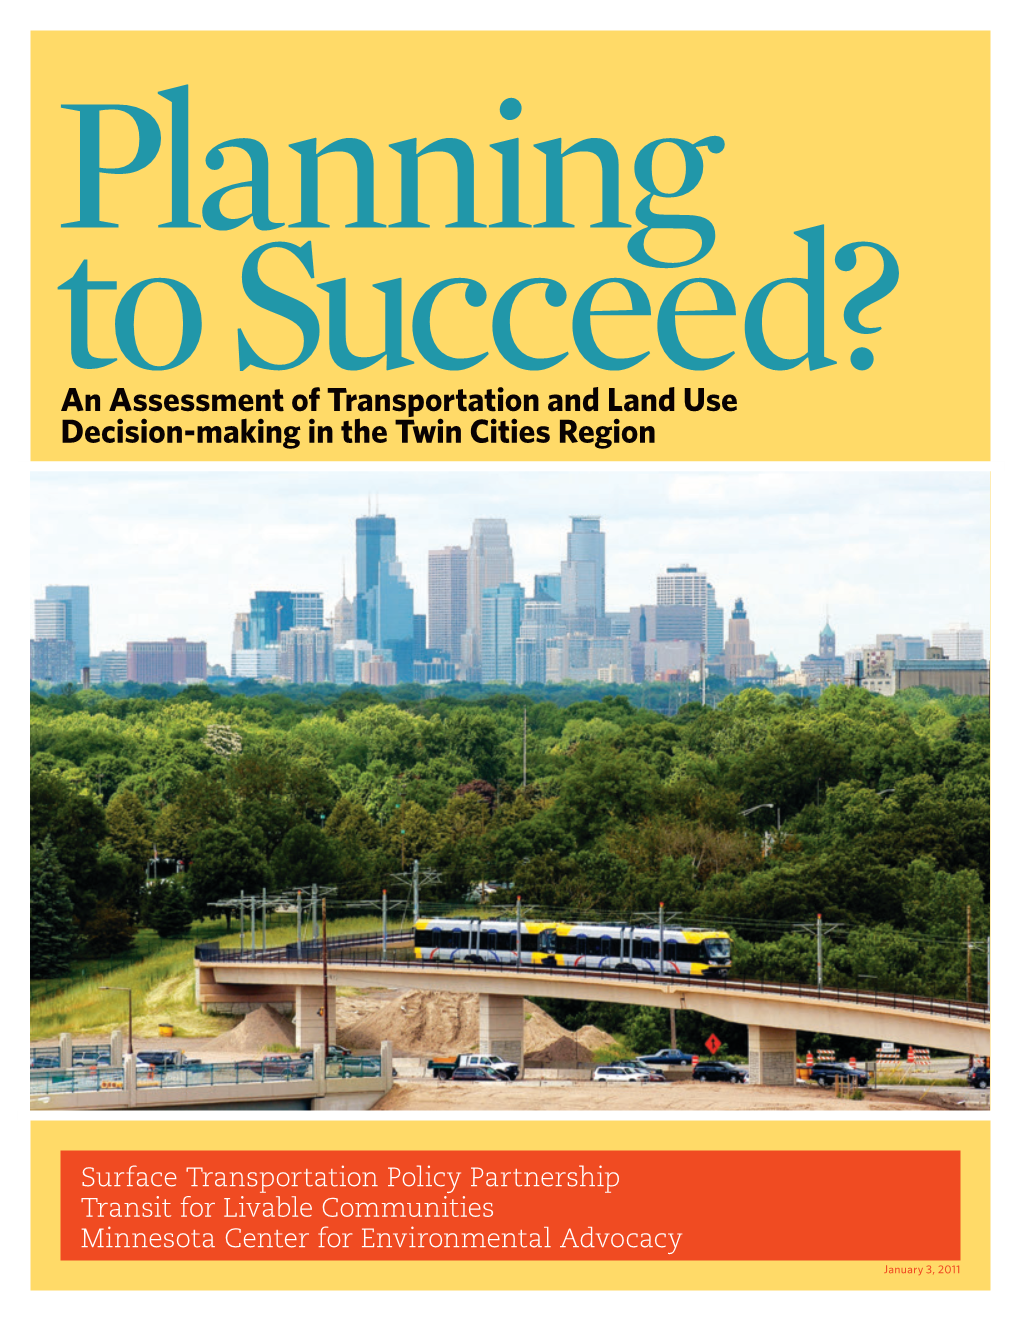 An Assessment of Transportation and Land Use Decision-Making in the Twin Cities Region I 1 Executive Summary